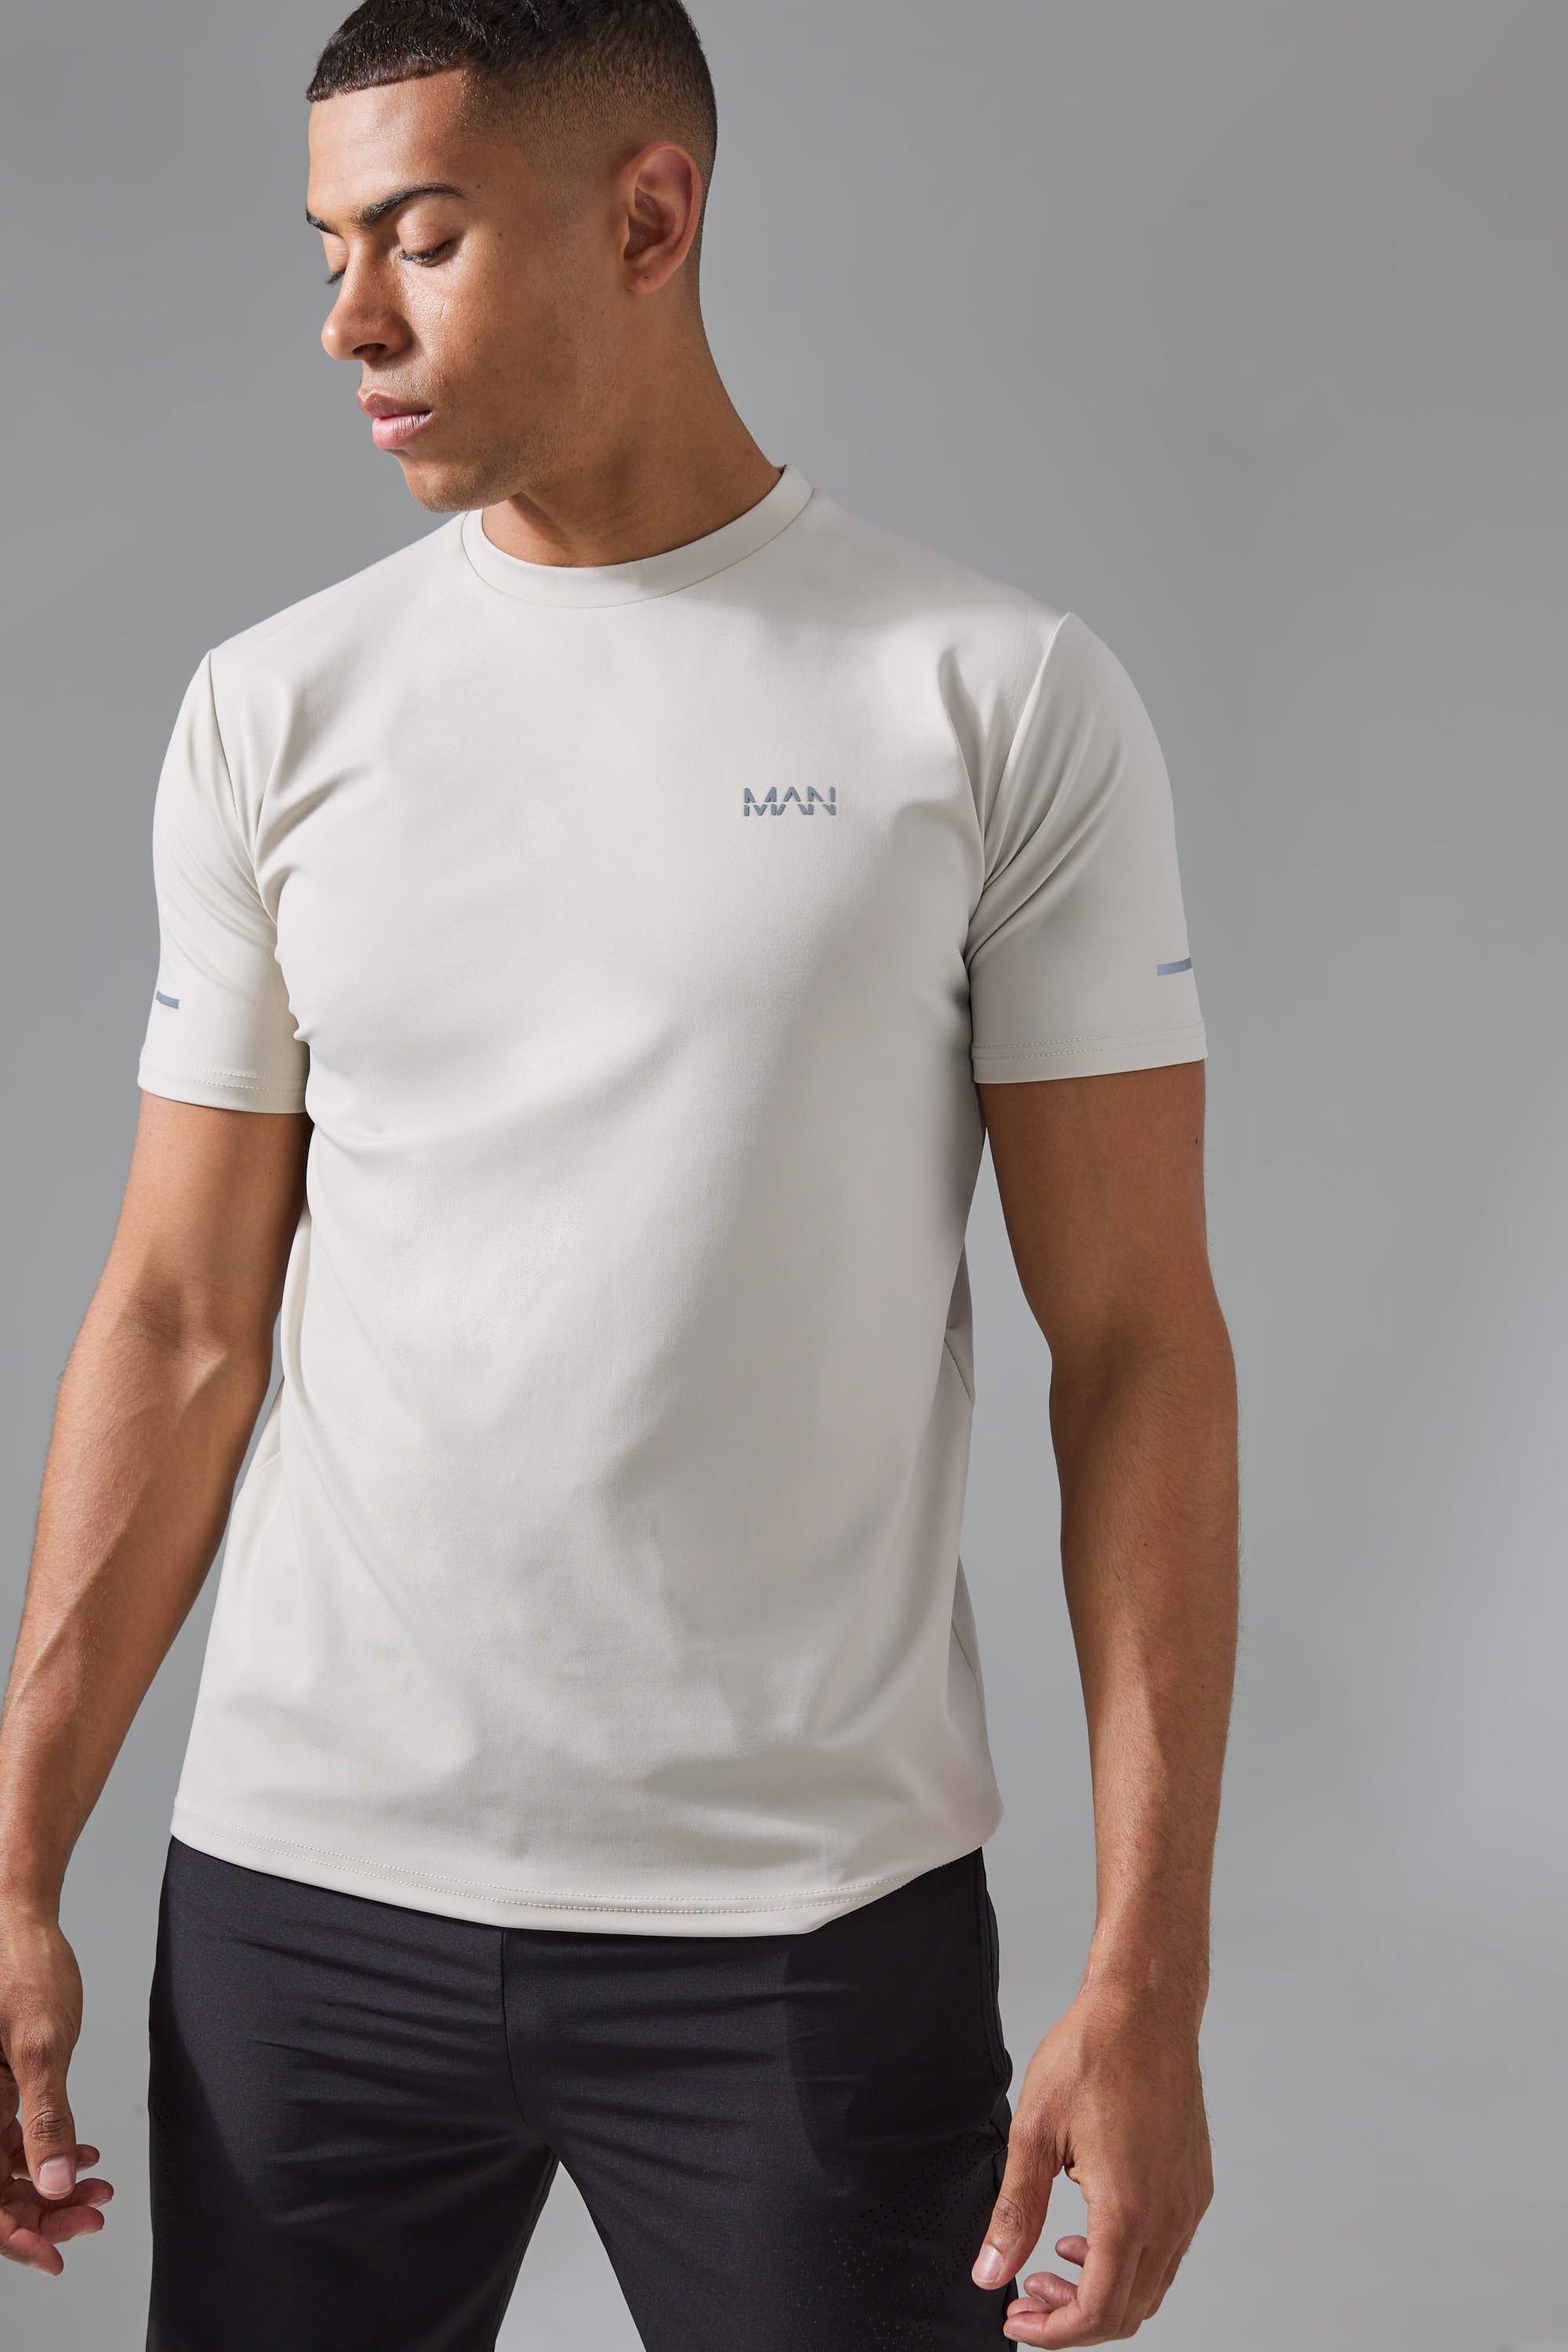 Image of Man Active Performance T-shirt, Beige